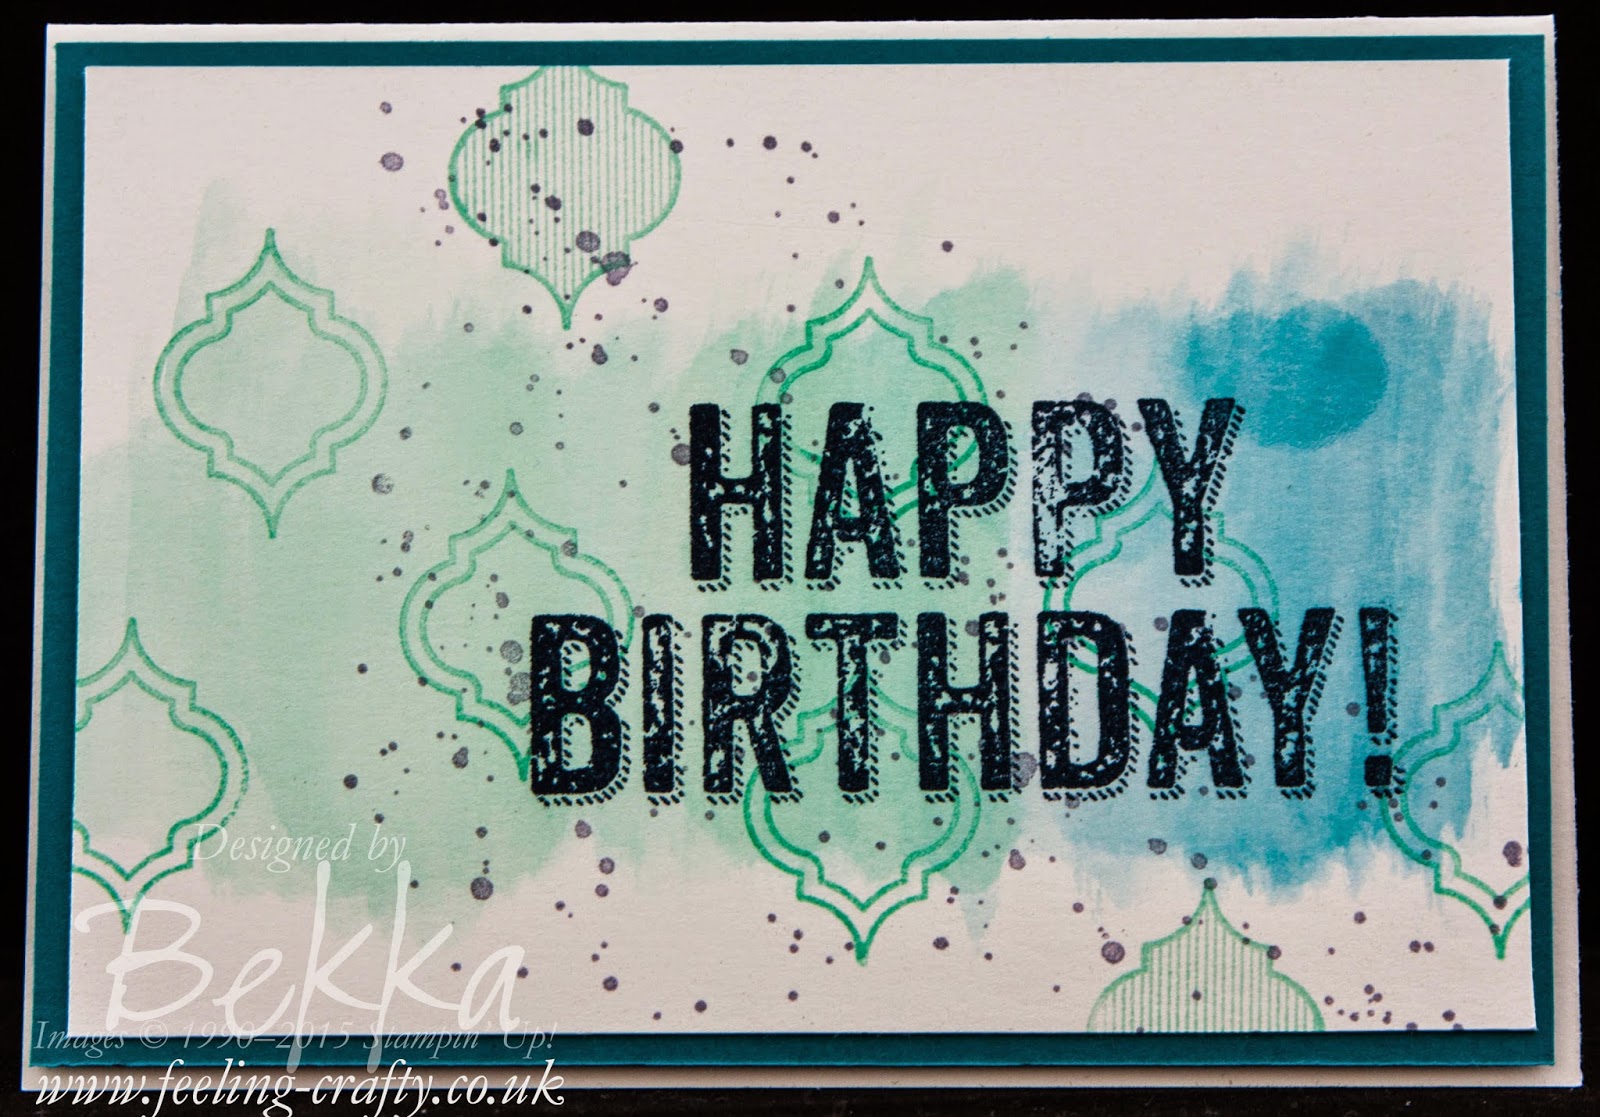 Banish the Birthday Blues with this Blue Birthday Card - check it out here